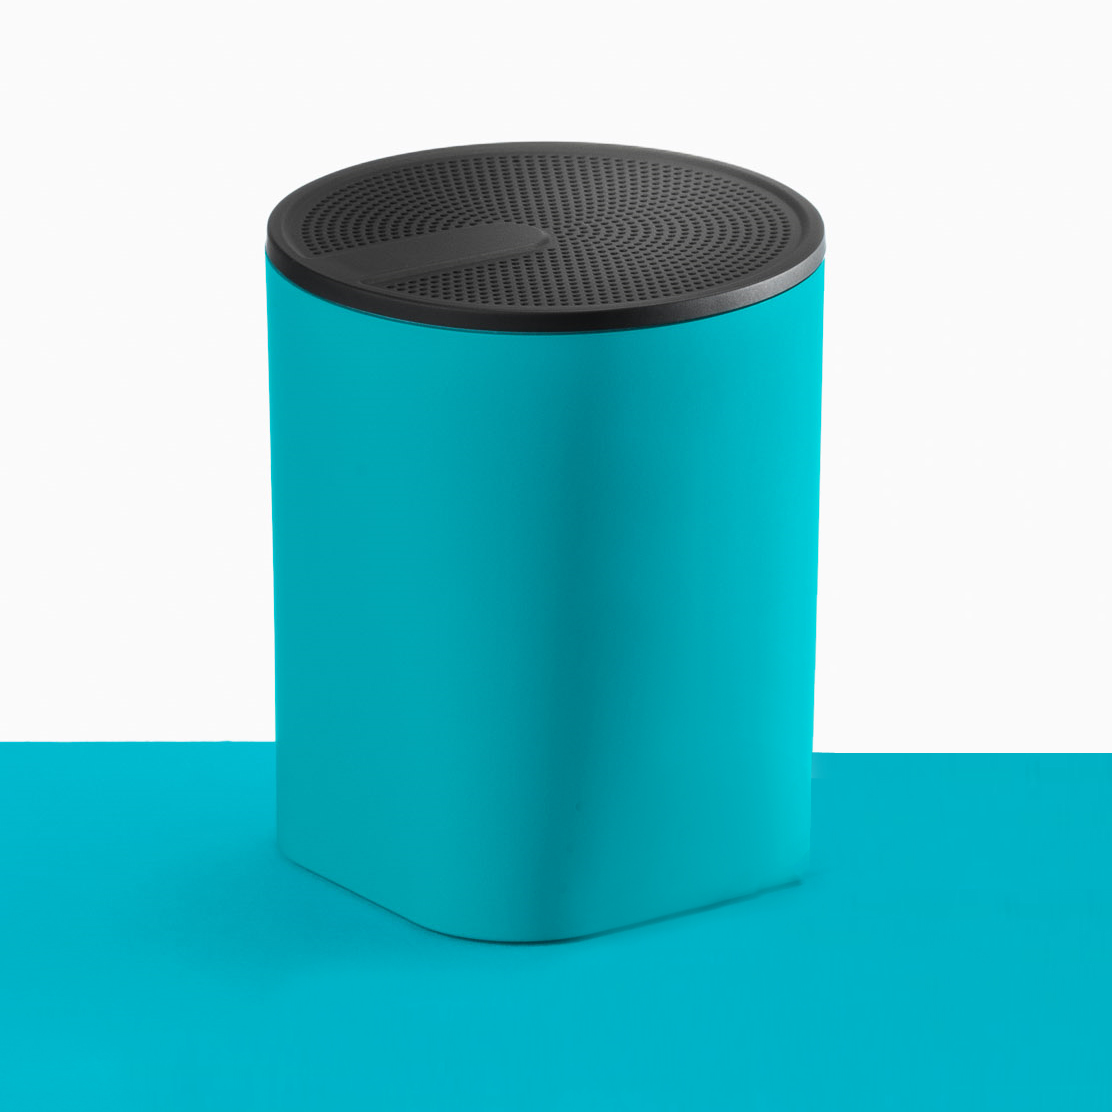 Turquoise Colour Sound Compact Speaker 1